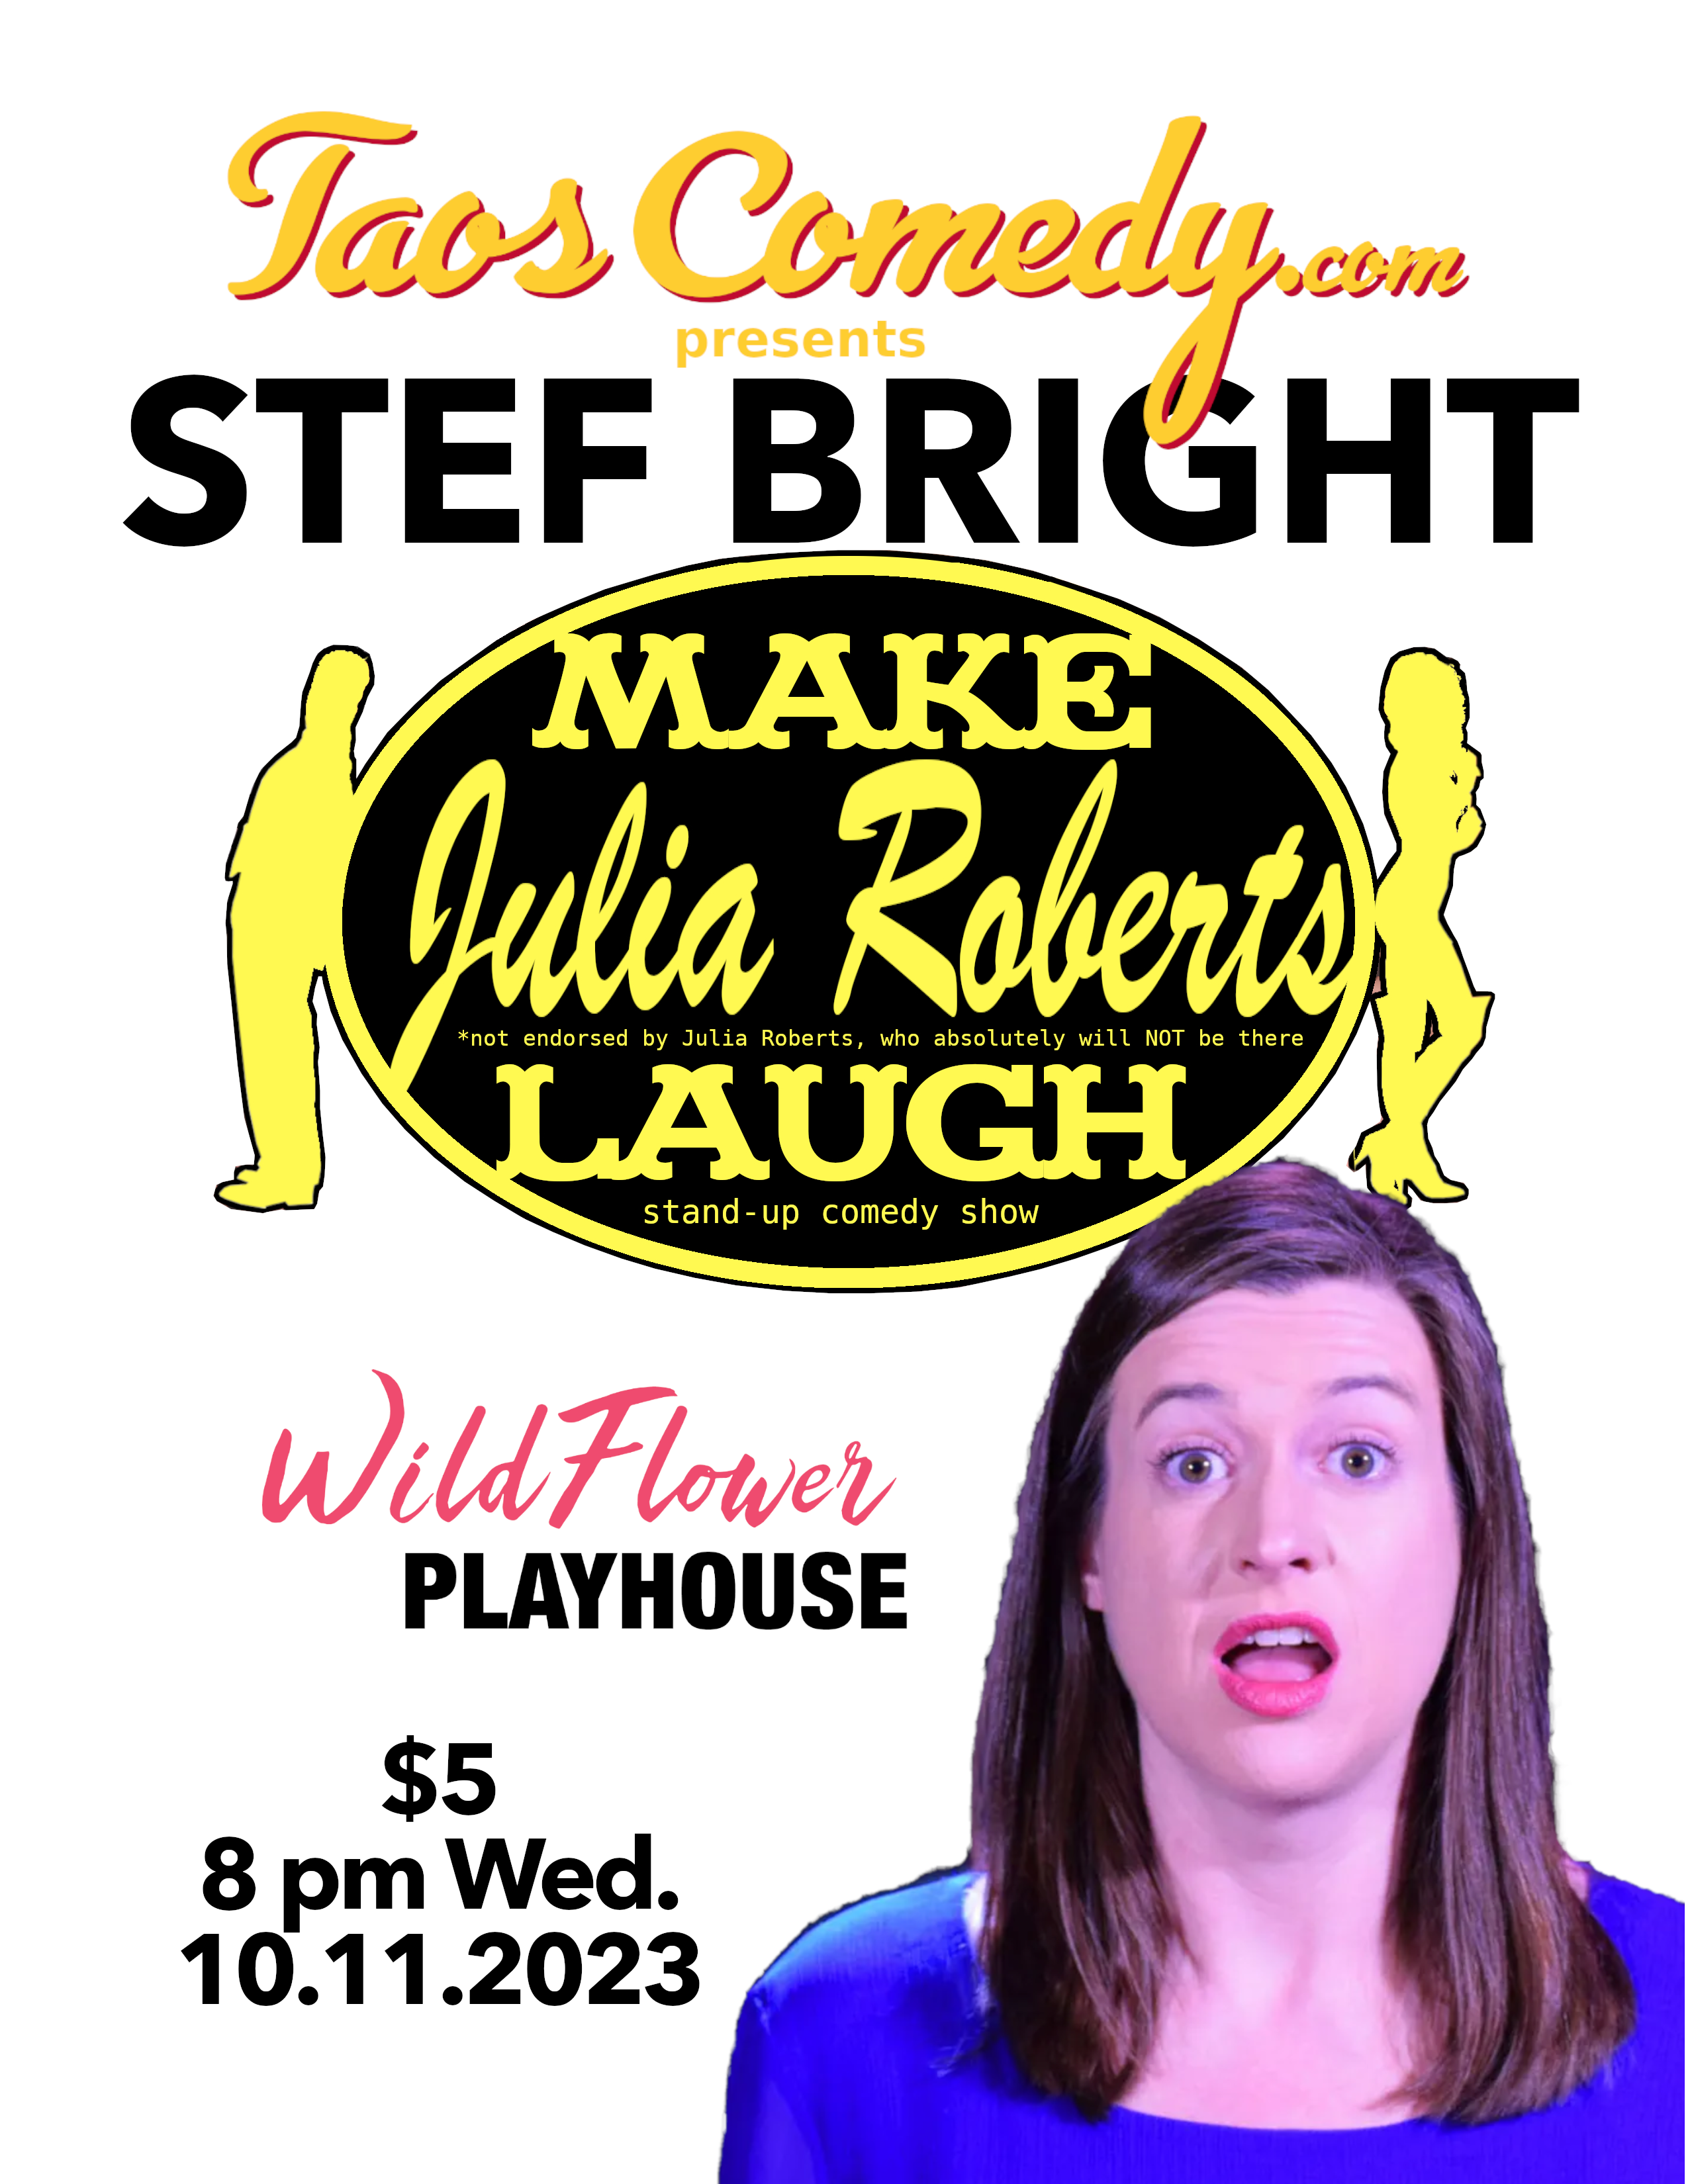 Stef Bright, Make Julia Roberts Laugh! stand-up comedy show at Wildflower Playhouse